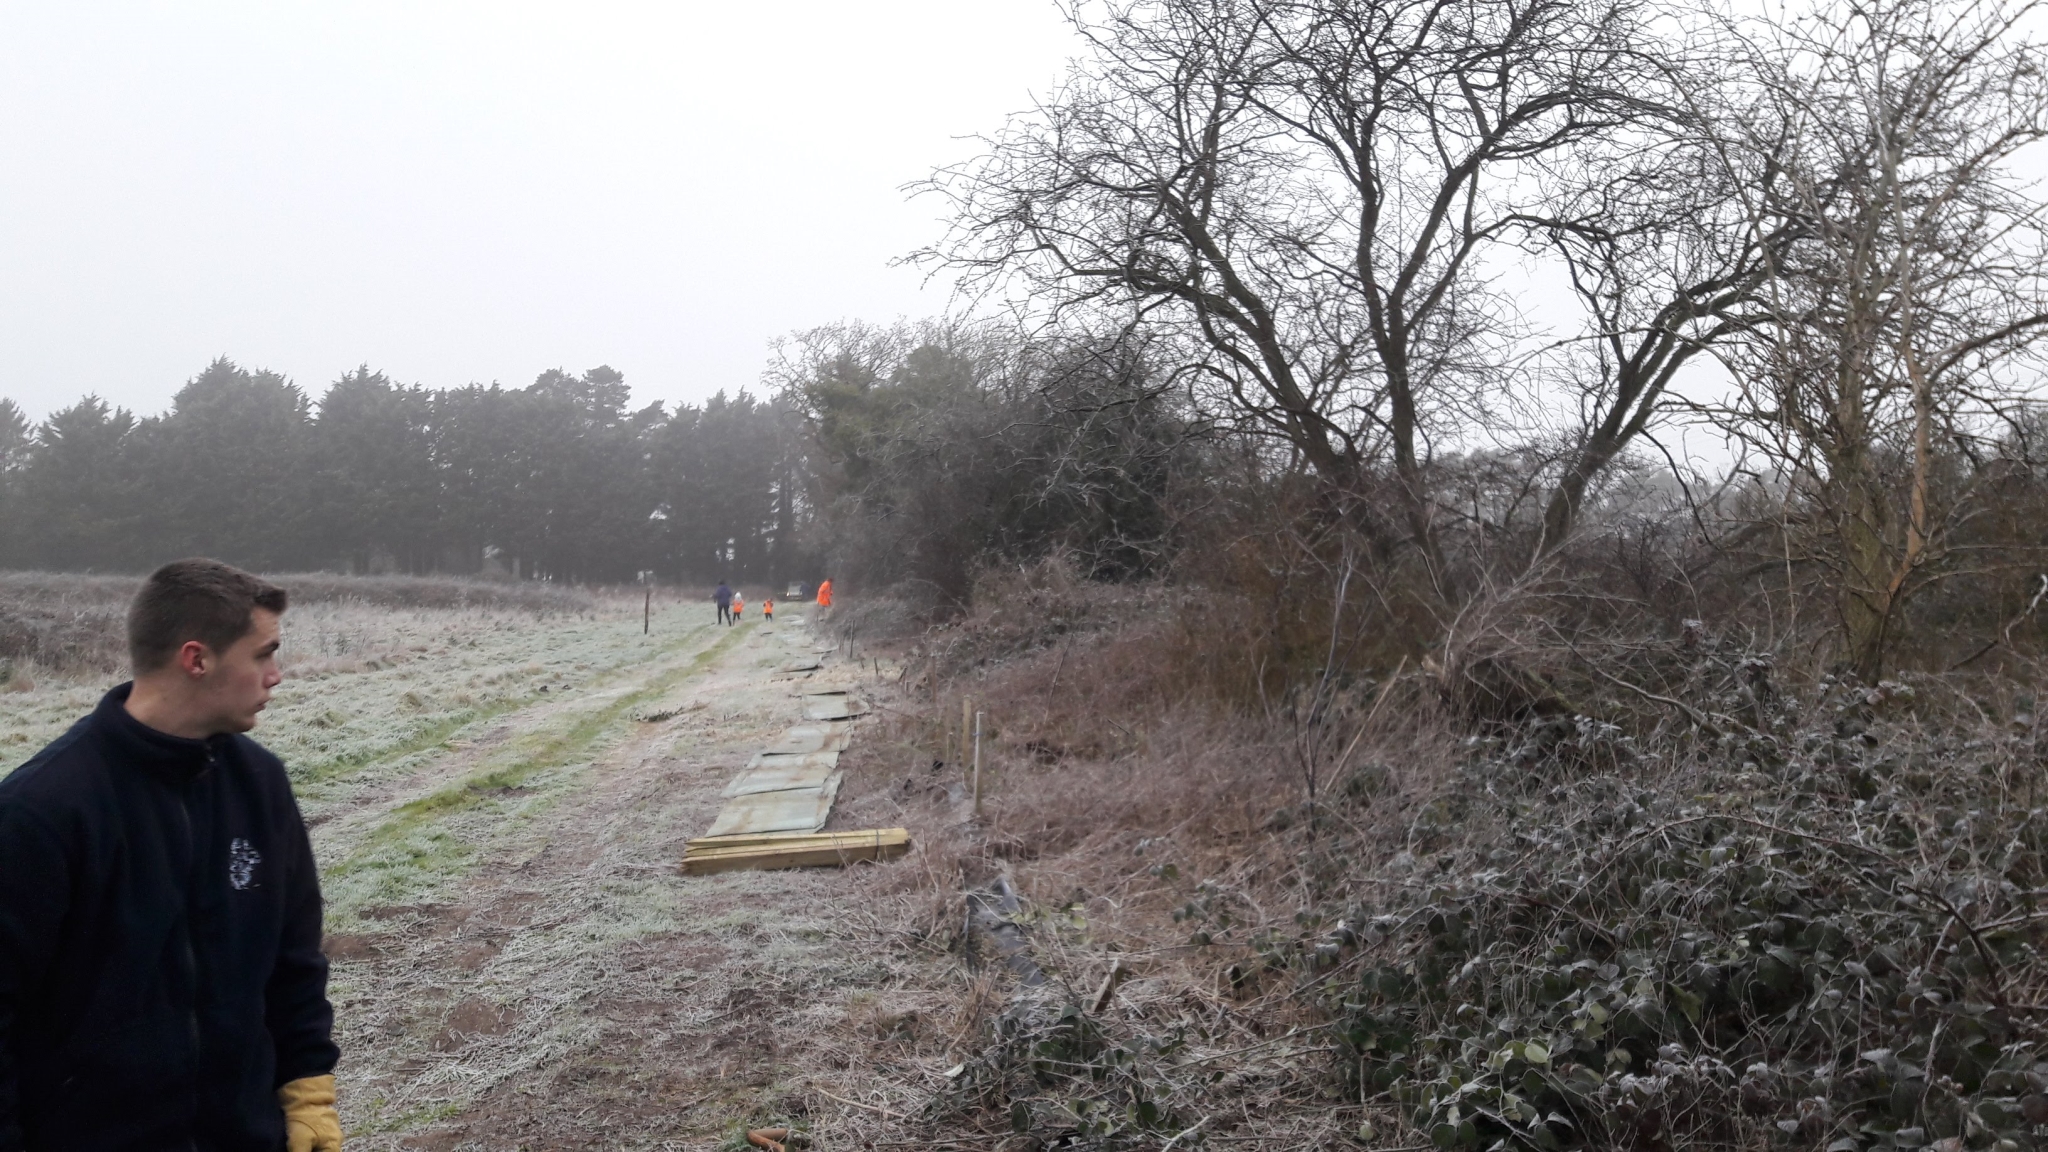 A photo from the FoTF Conservation Event - January 2018 - Erecting the Toad Fence at Cranwich : Sections of the fence lay down on the ground, with a volunteer in the foreground